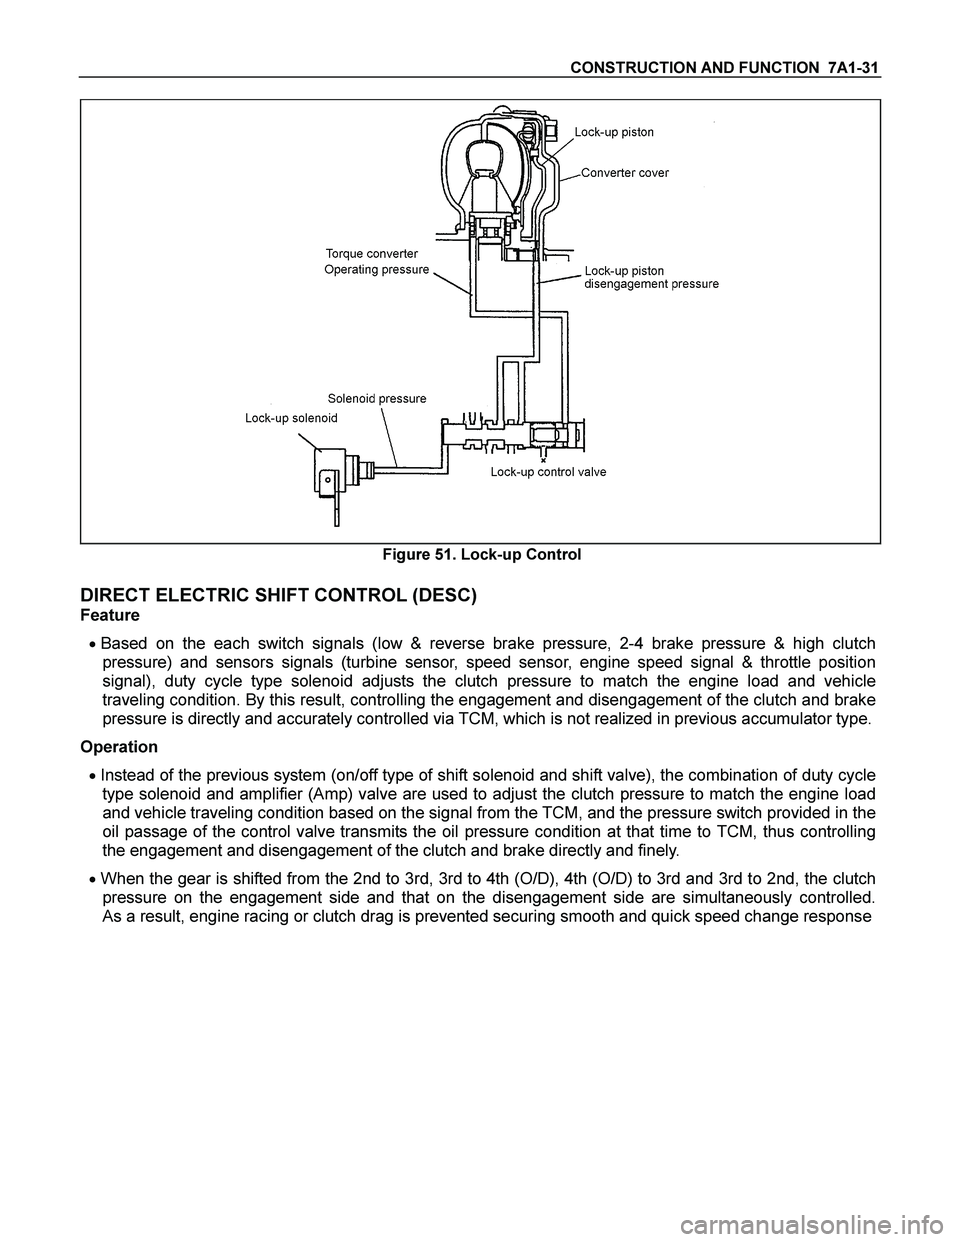 ISUZU TF SERIES 2004  Workshop Manual CONSTRUCTION AND FUNCTION  7A1-31 
  
 
 Figure 51. Lock-up Control 
 
DIRECT ELECTRIC SHIFT CONTROL (DESC) 
Feature  
 Based on the each switch signals (low & reverse brake pressure, 2-4 brake press